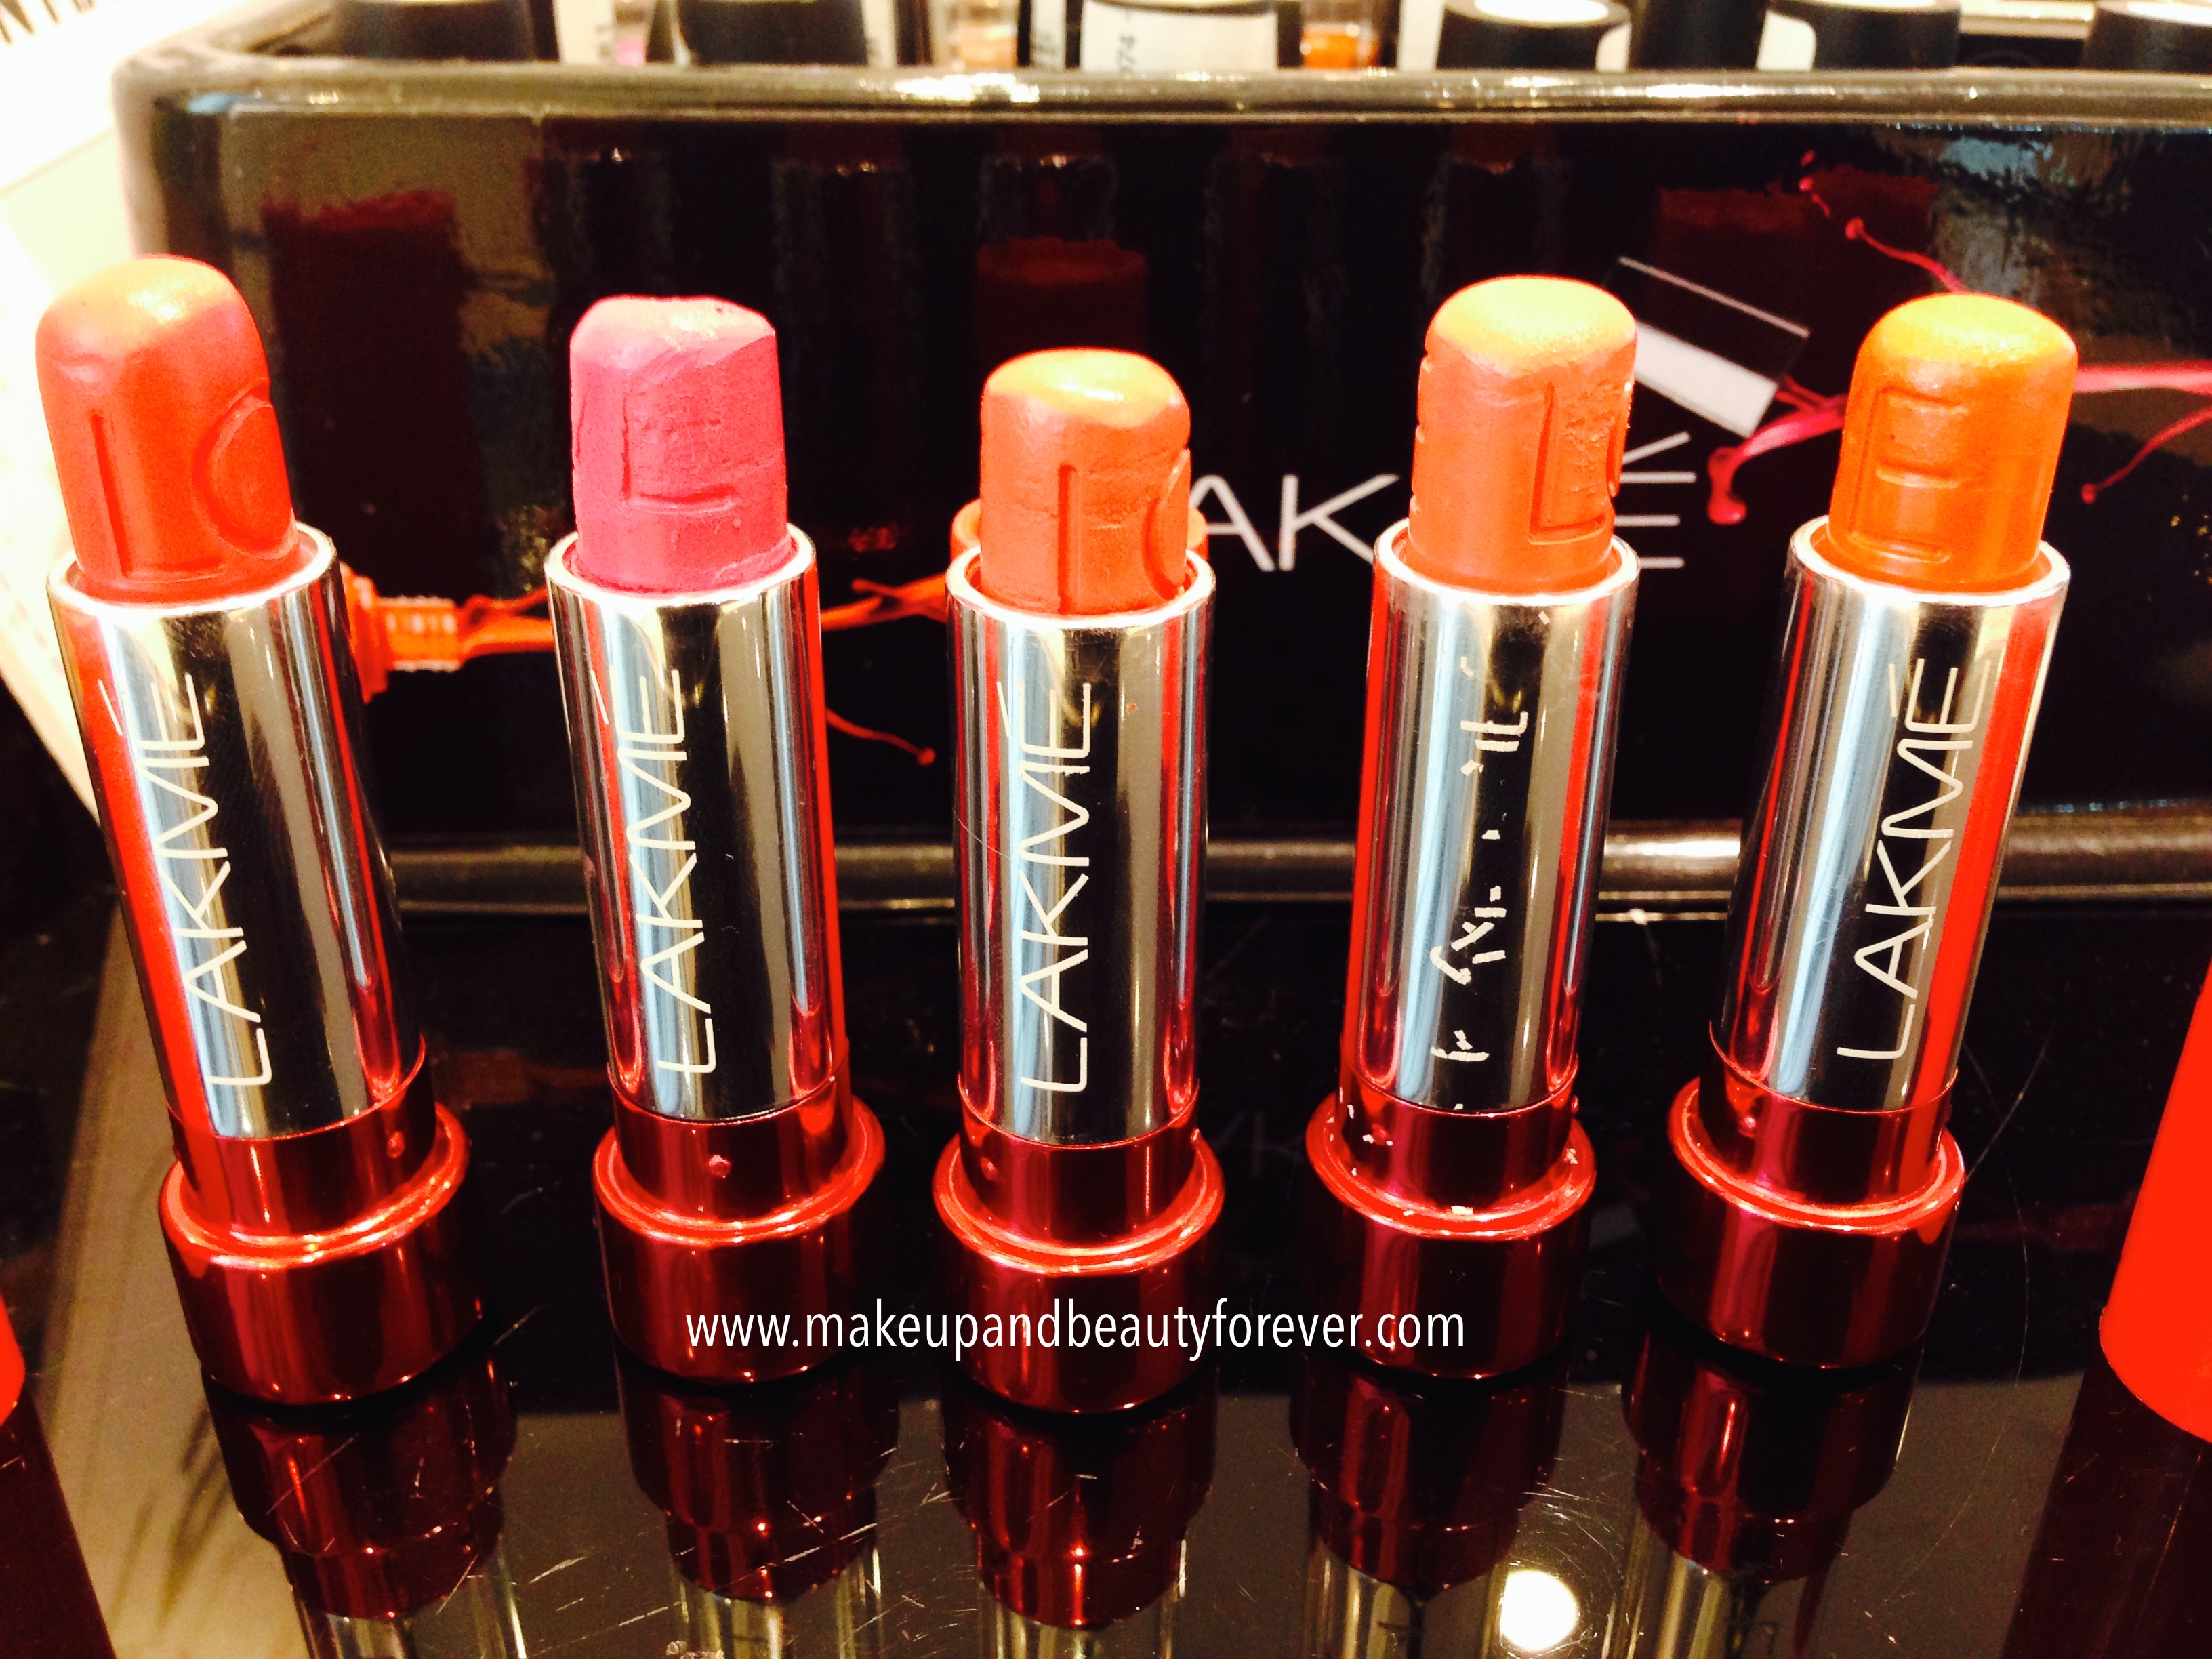 Lakme Lip Love Lipsticks Review, Shades, Swatches, Price and Details